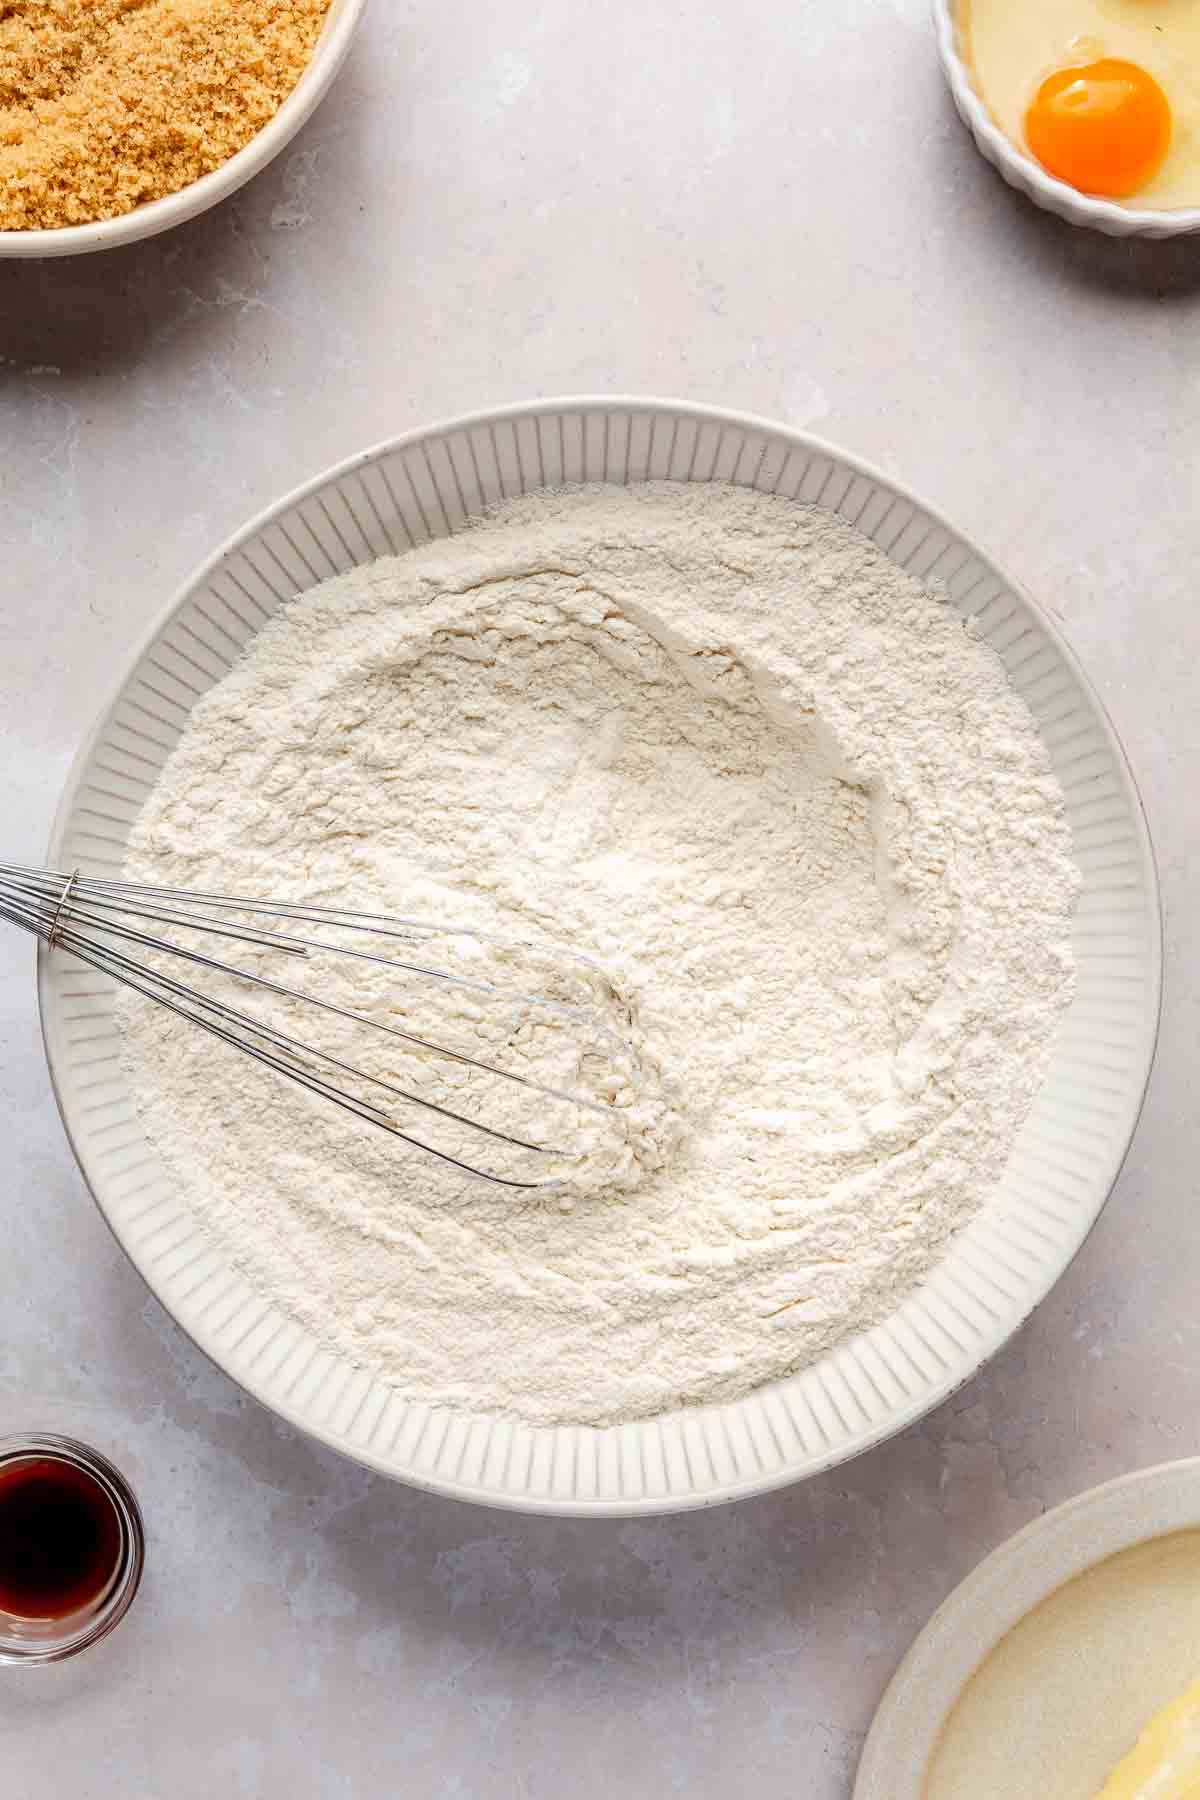 Using a whisk to mix flour with other dry ingredients in a bowl.